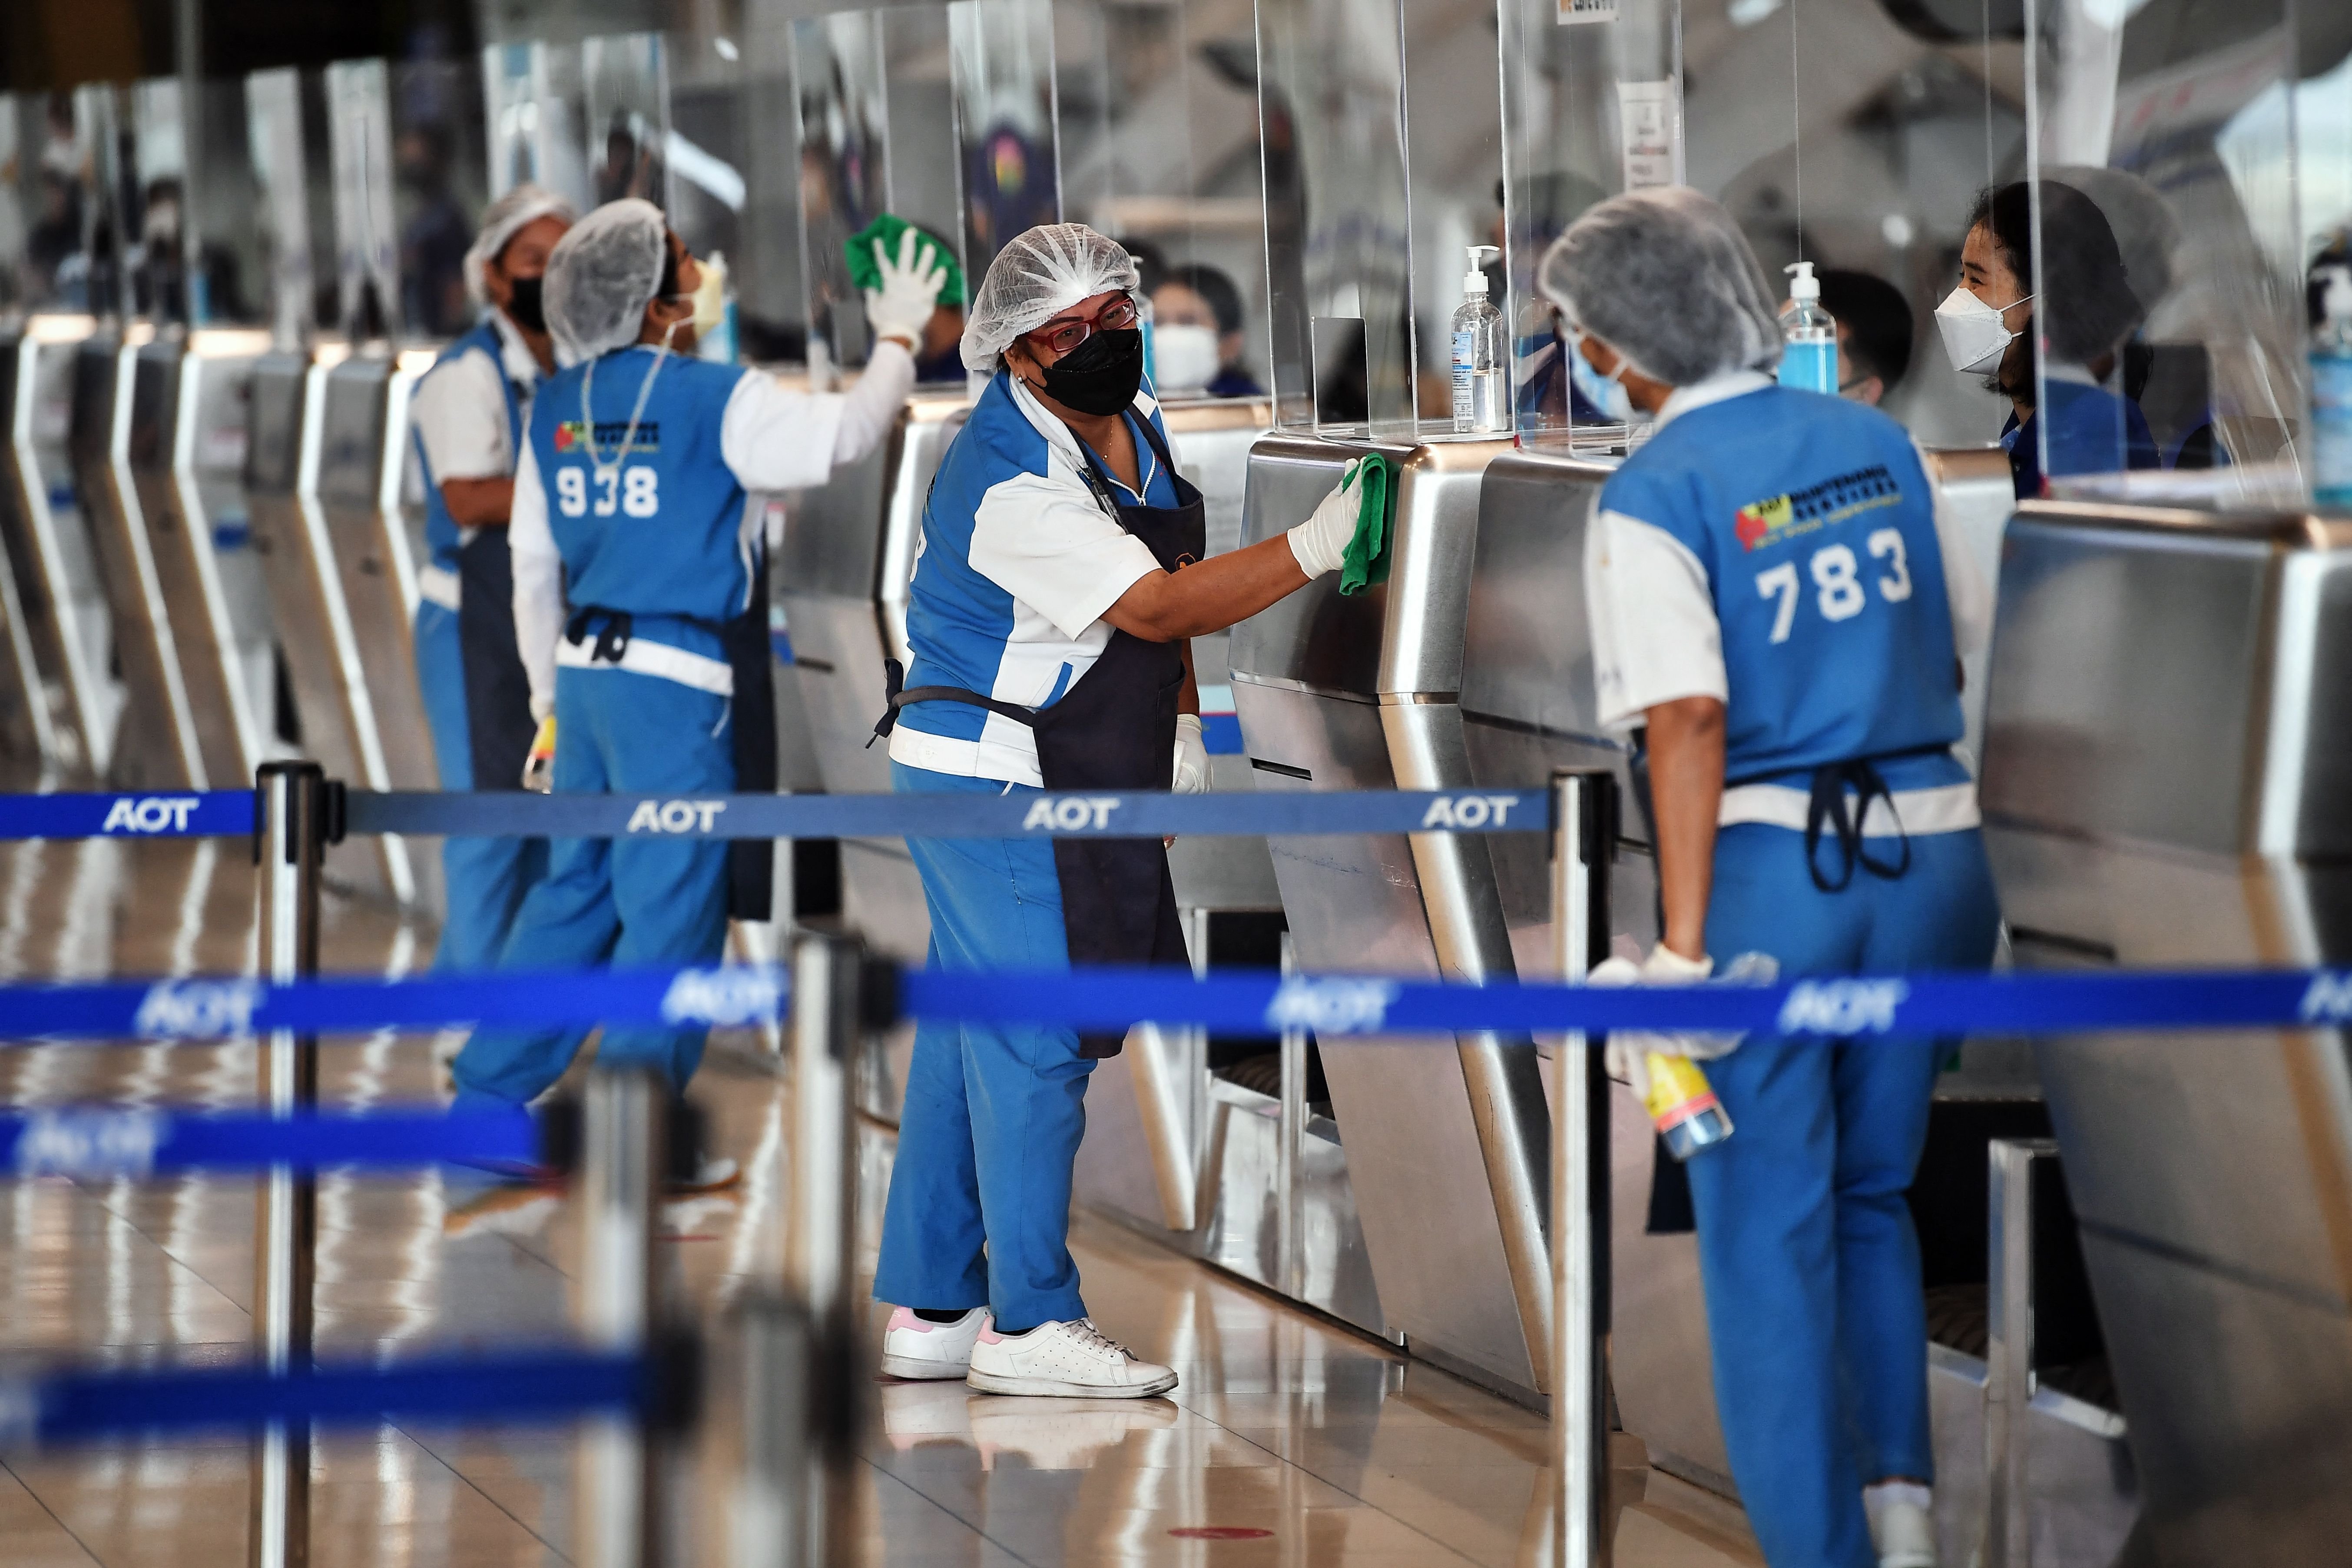 Airport staff clean the check-in kiosks at Suvarnabhumi International Airport as officials rehearse reopening procedures to welcome the first group of vaccinated tourists without quarantine on November 1, in Bangkok on October 27th, 2021.